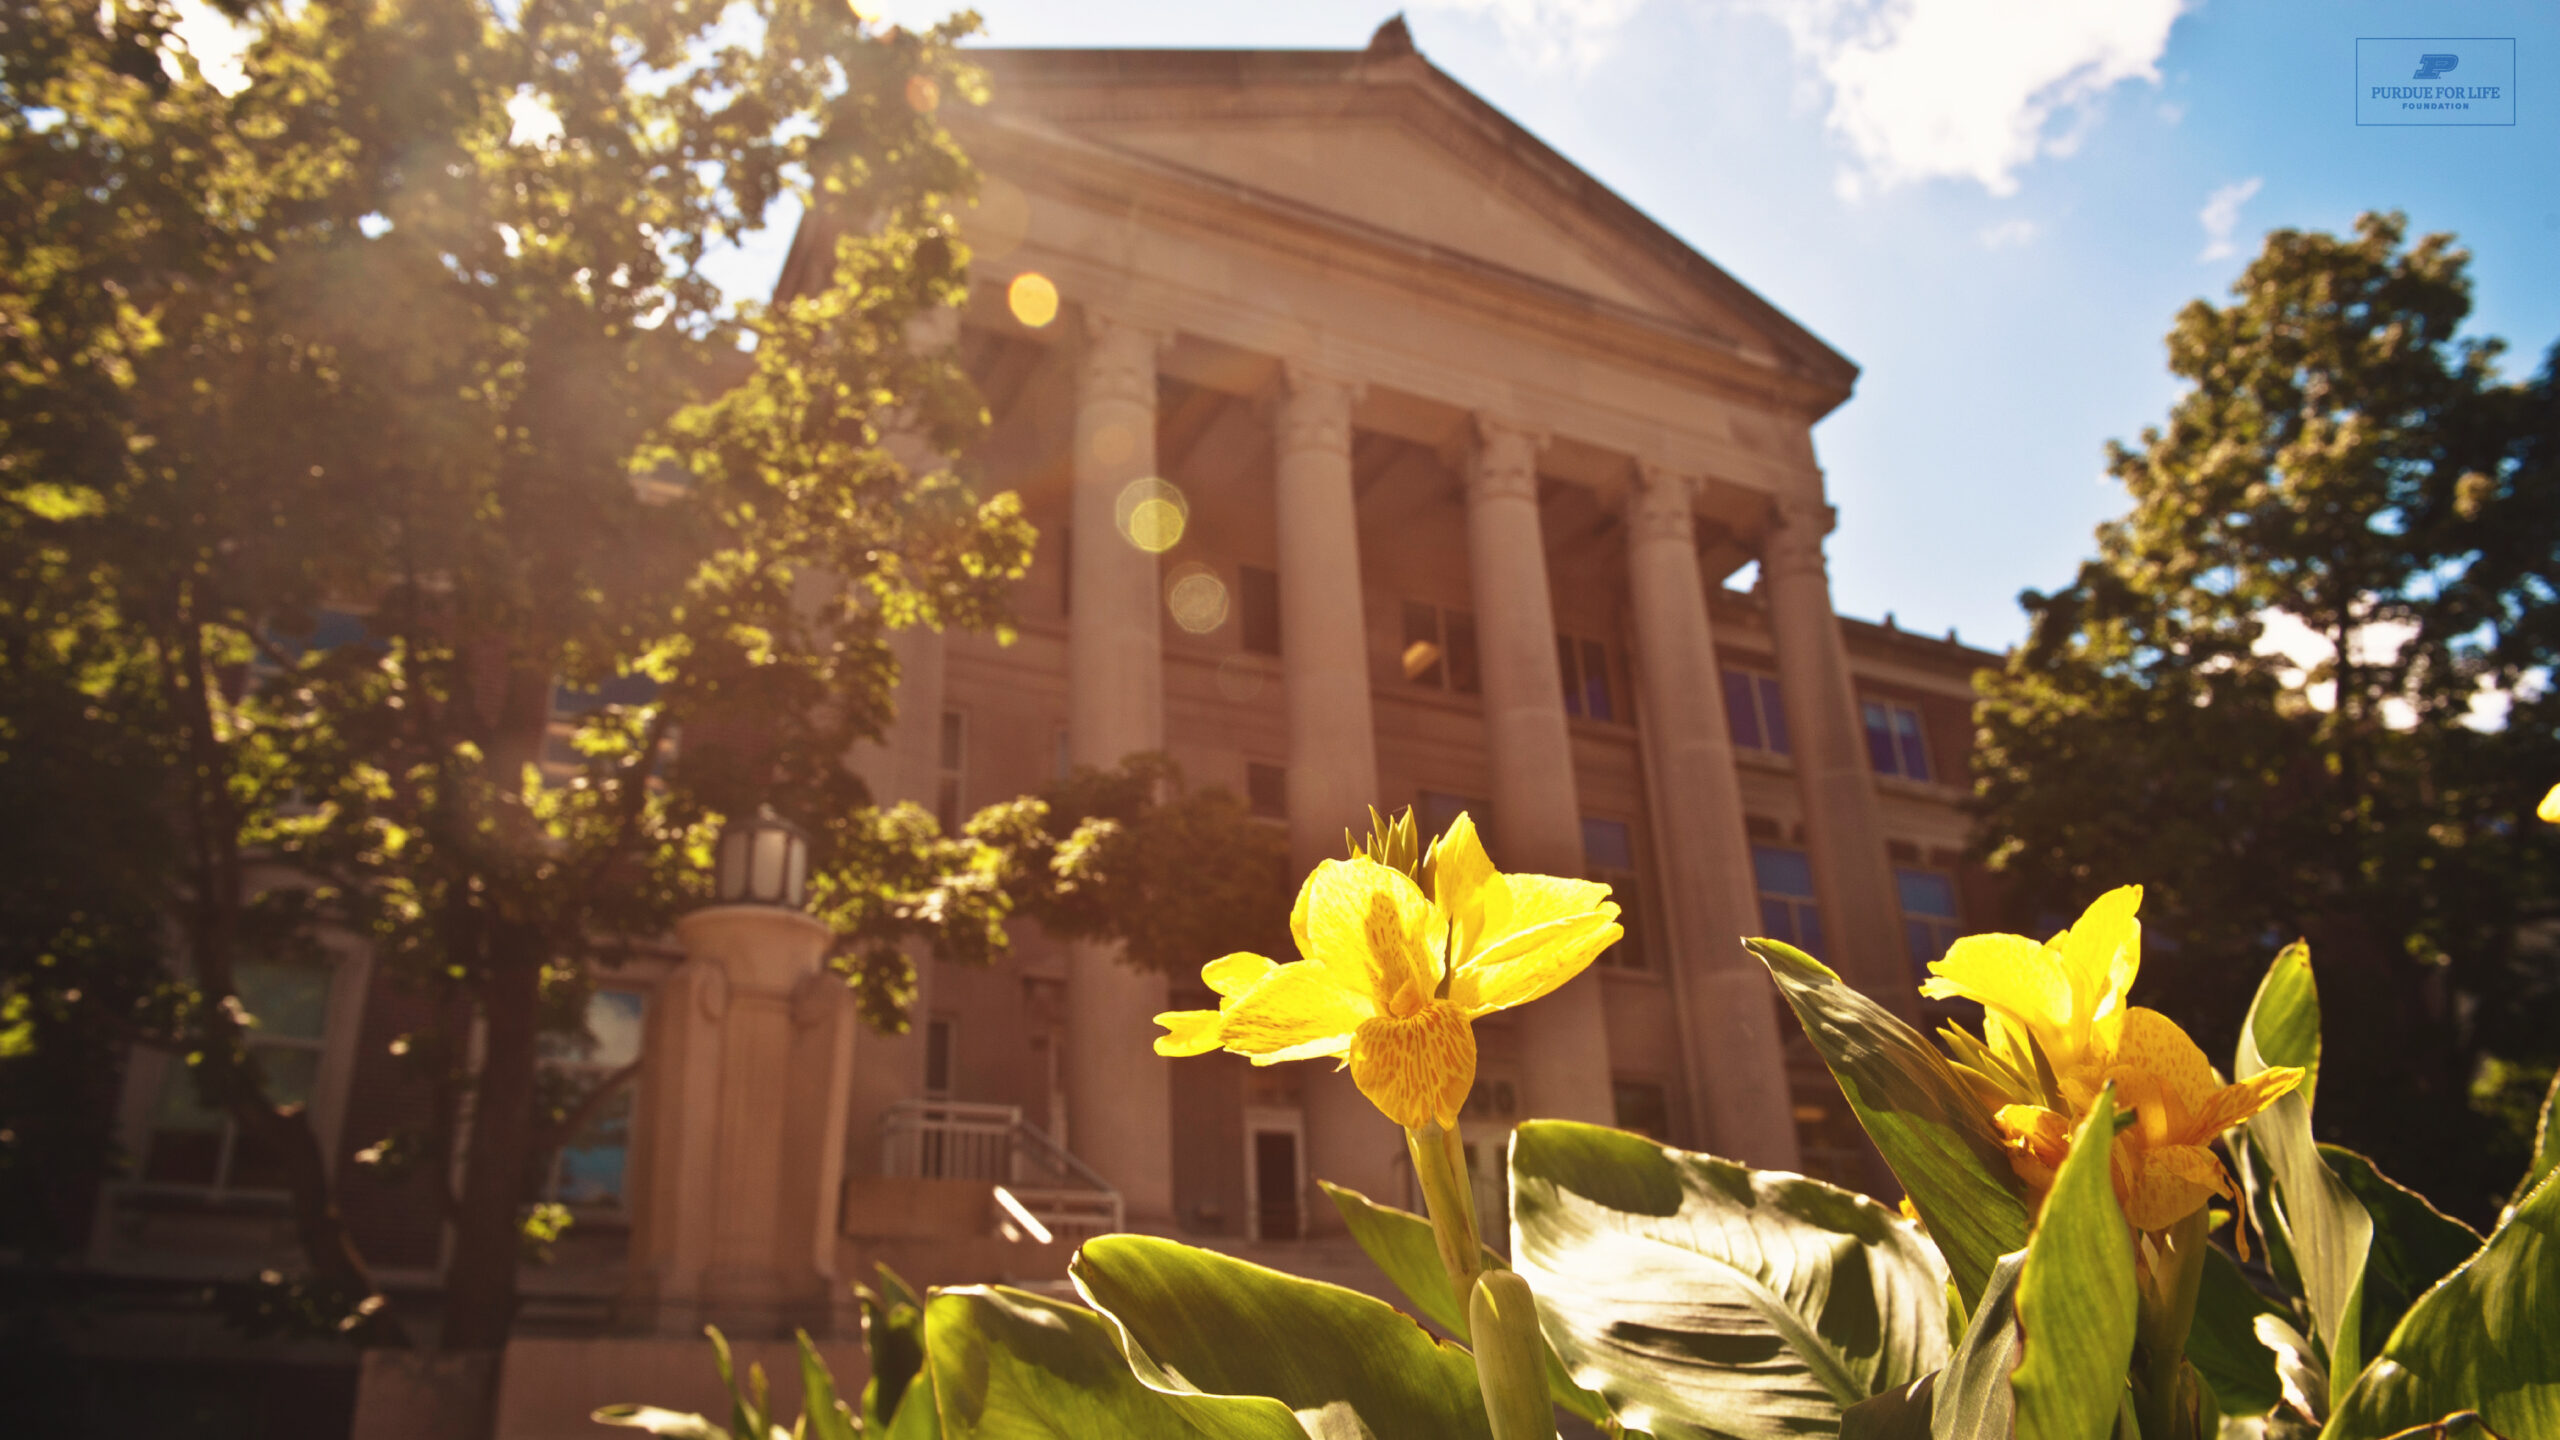 A yellow flower is shown in front of a blurred campus building in the background. the image contains no colander.